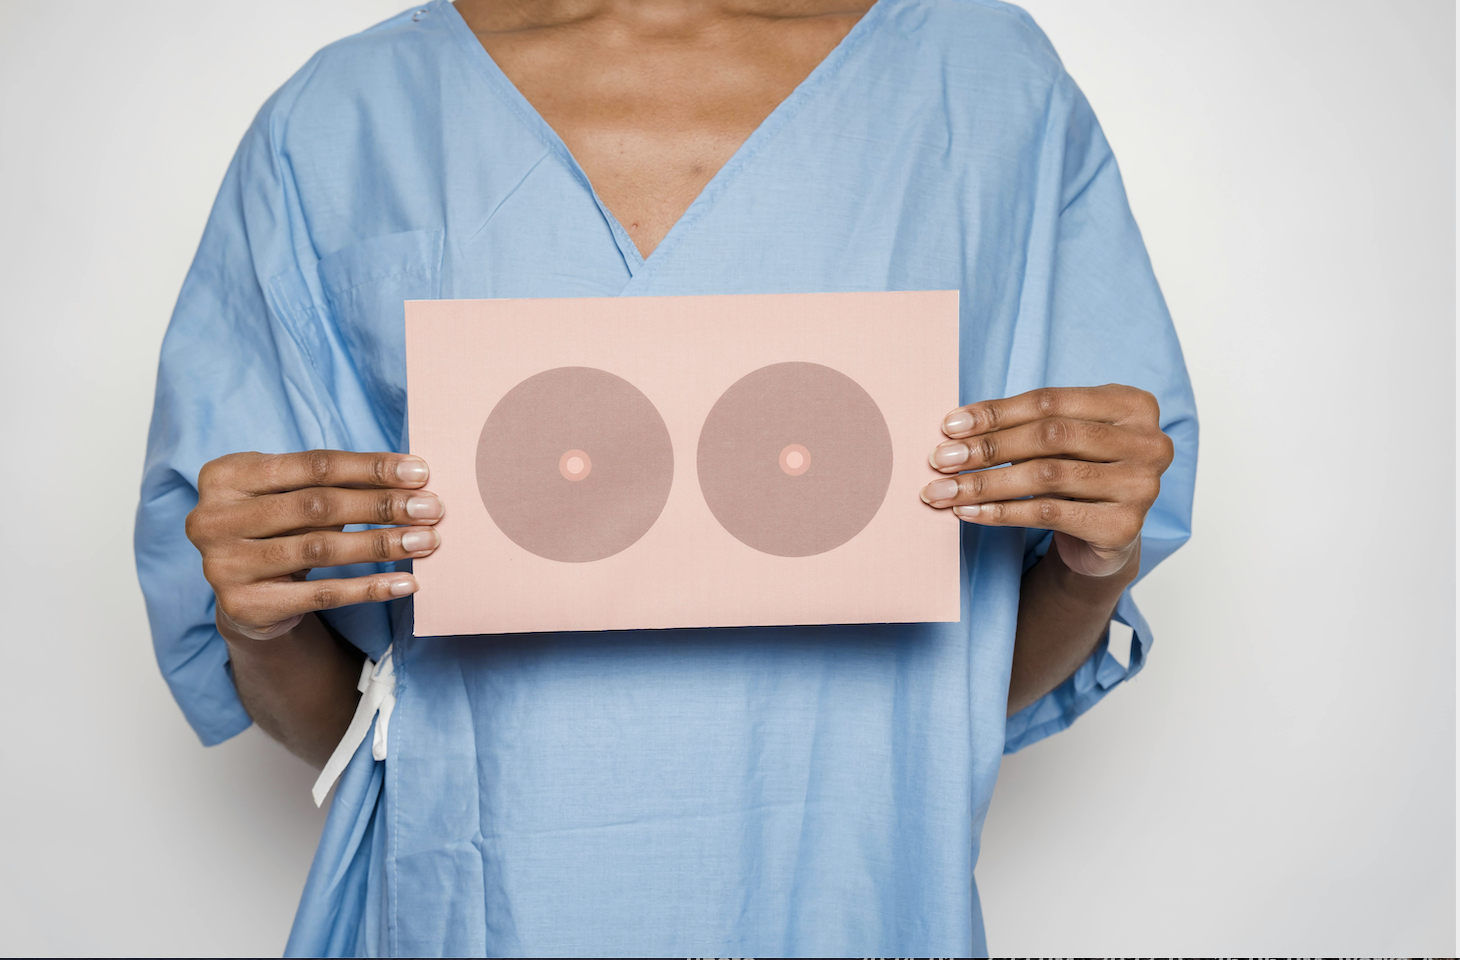 Early Signs of Breast Cancer to Look Out For<br />
